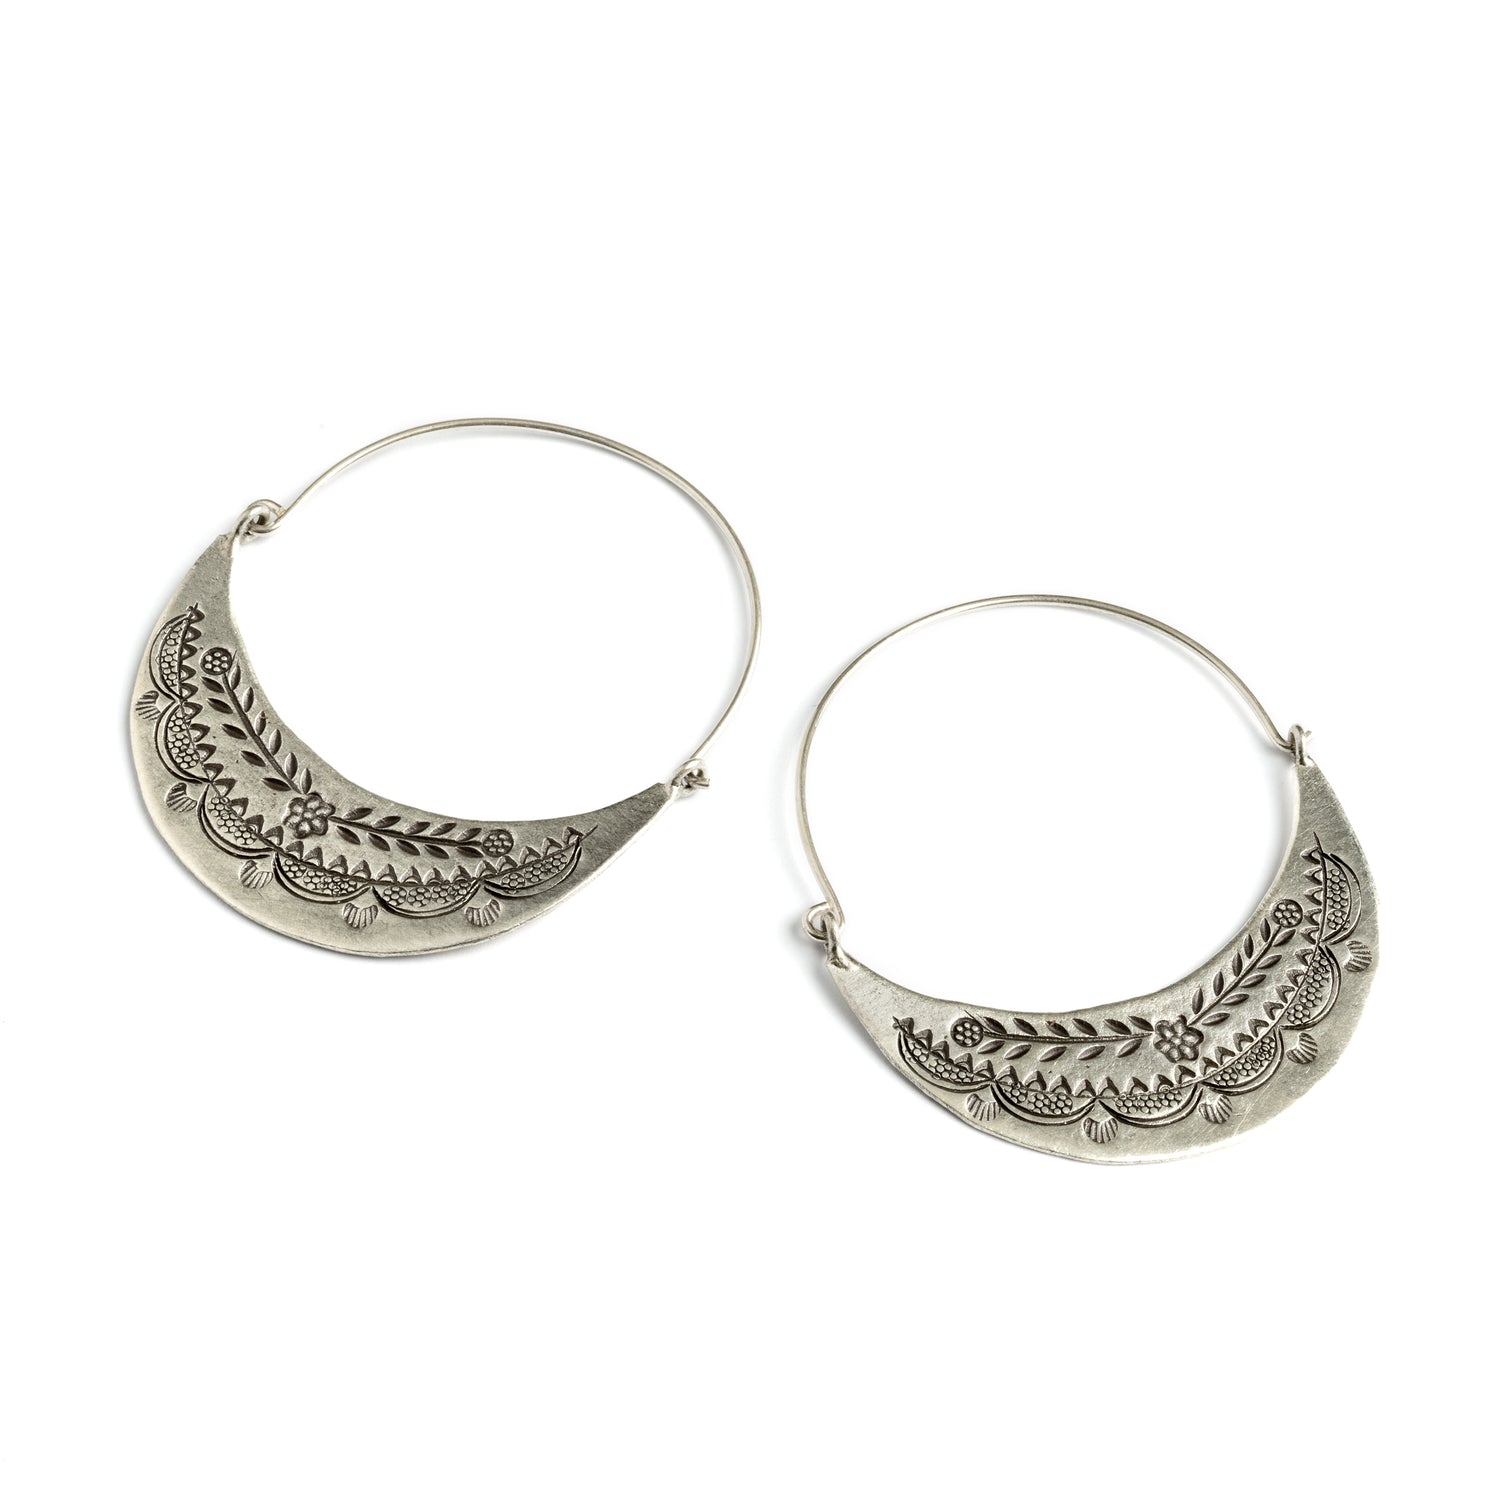 Half Moon Tribal Silver Earrings frontal and side view